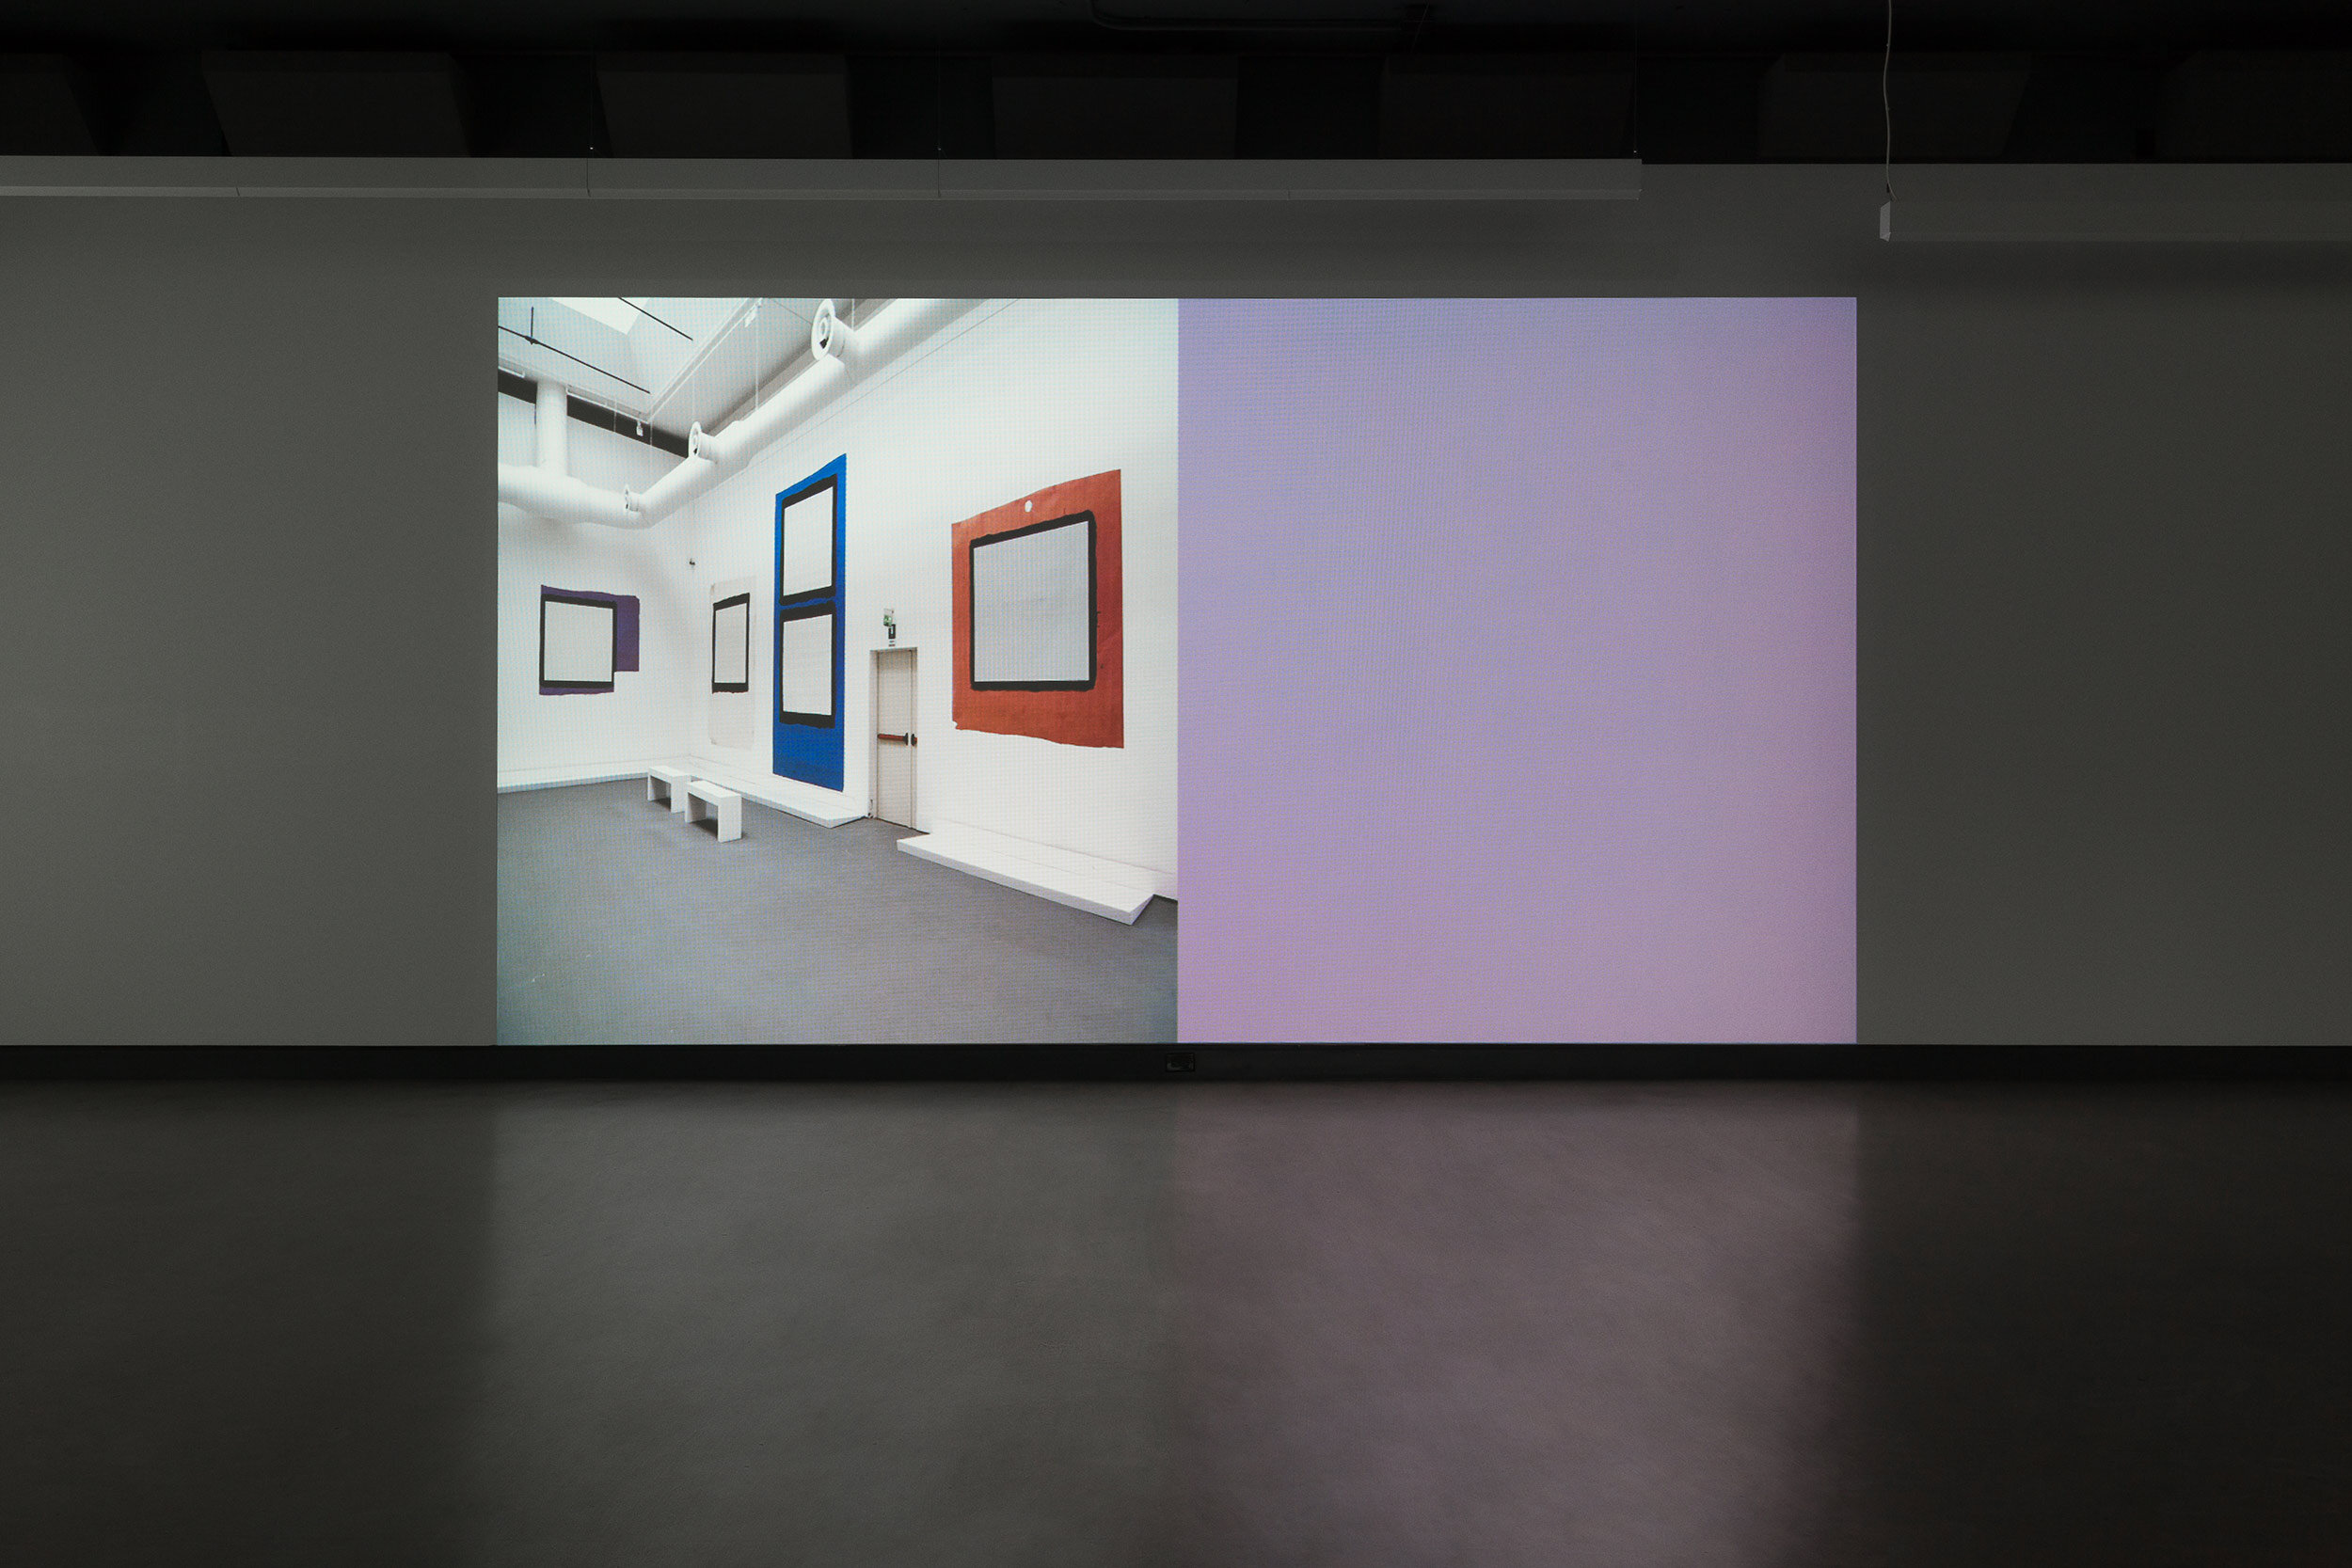  © David Tomas, installation view of the exhibition  Moving Through Time and Space , Dazibao, 2021. Photo: Marilou Crispin. 